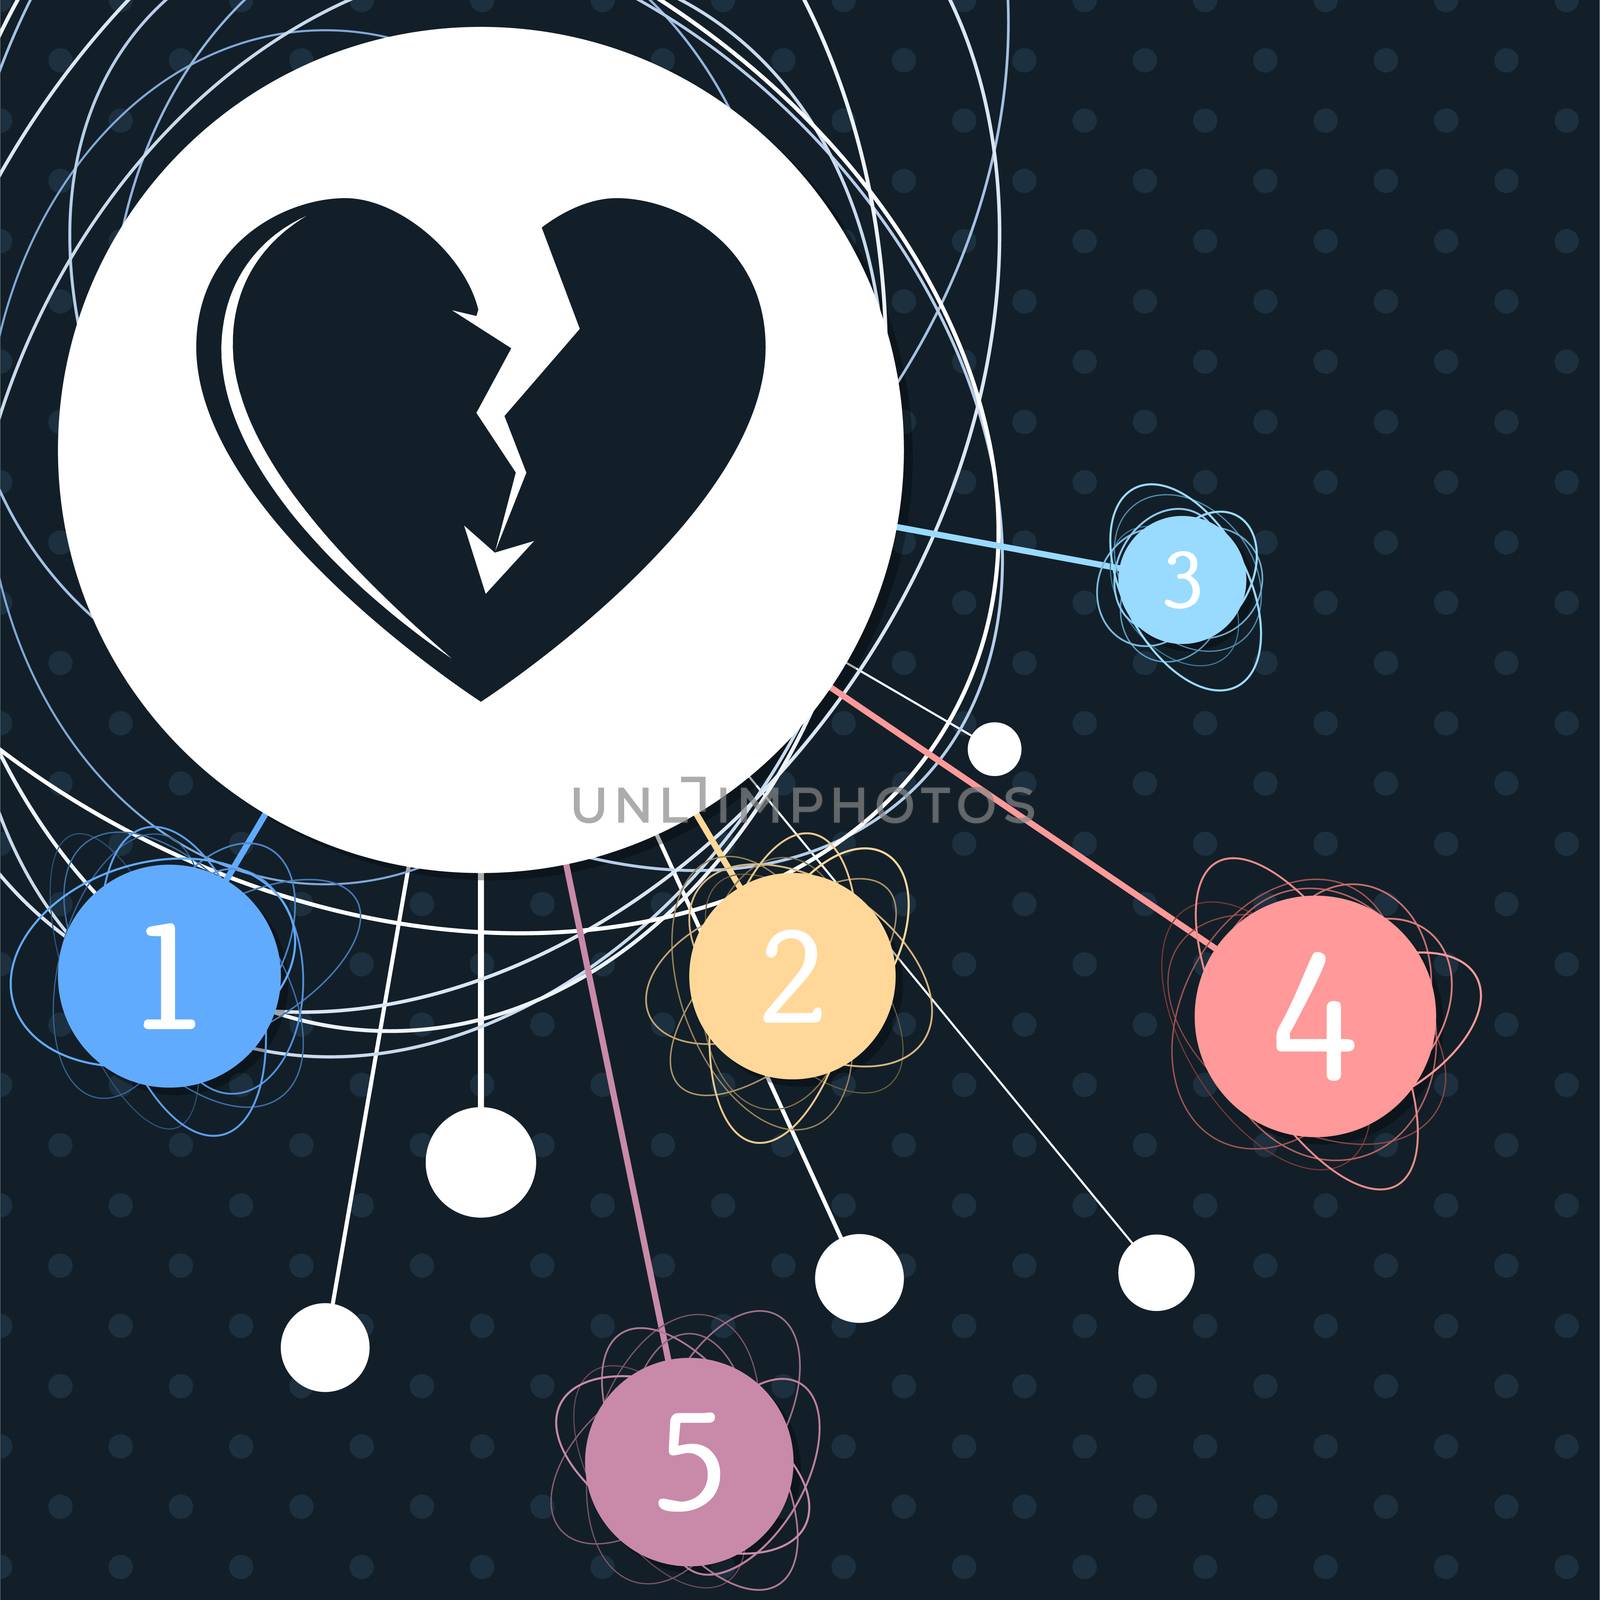 Broken heart icon with the background to the point and infographic style.  by Adamchuk